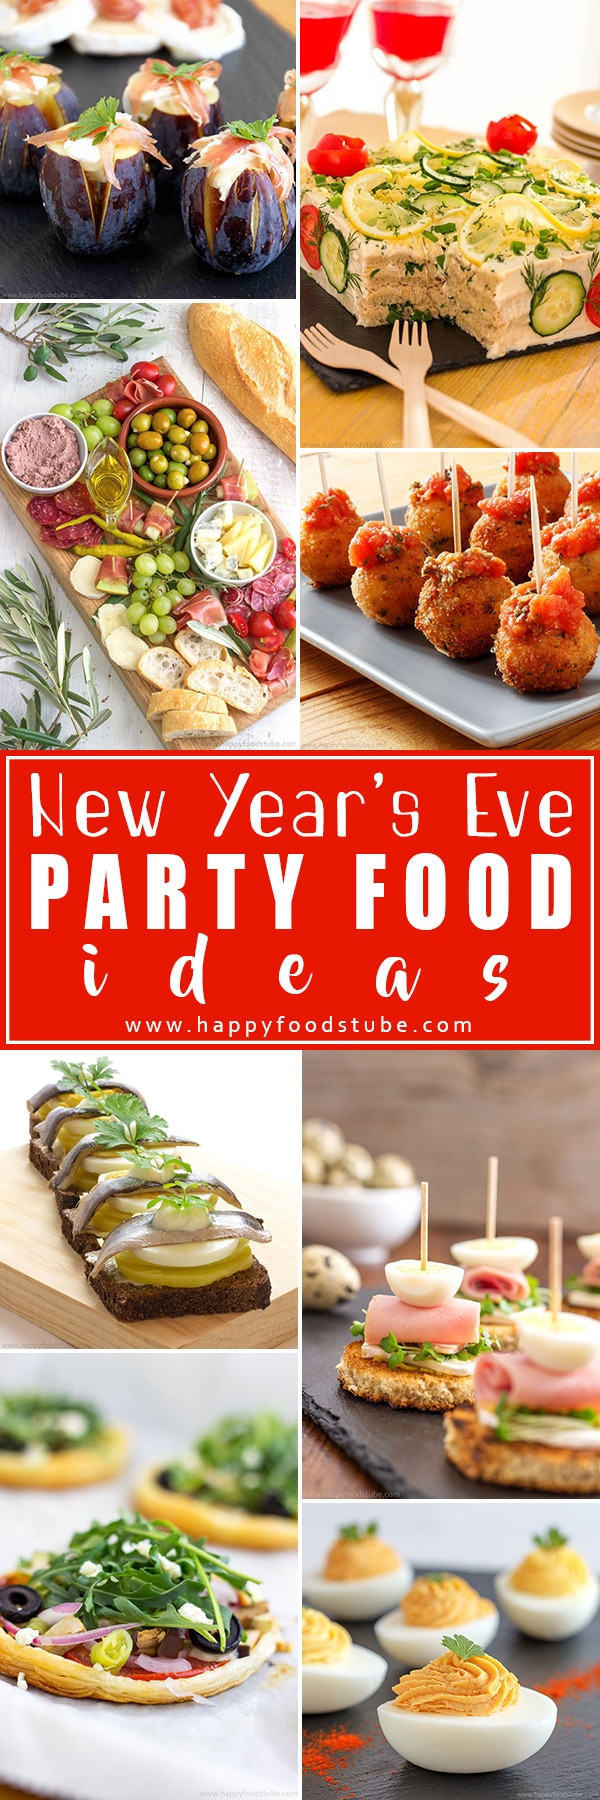 New Years Eve Party Foods Ideas
 New Years Eve Party Food Ideas Happy Foods Tube